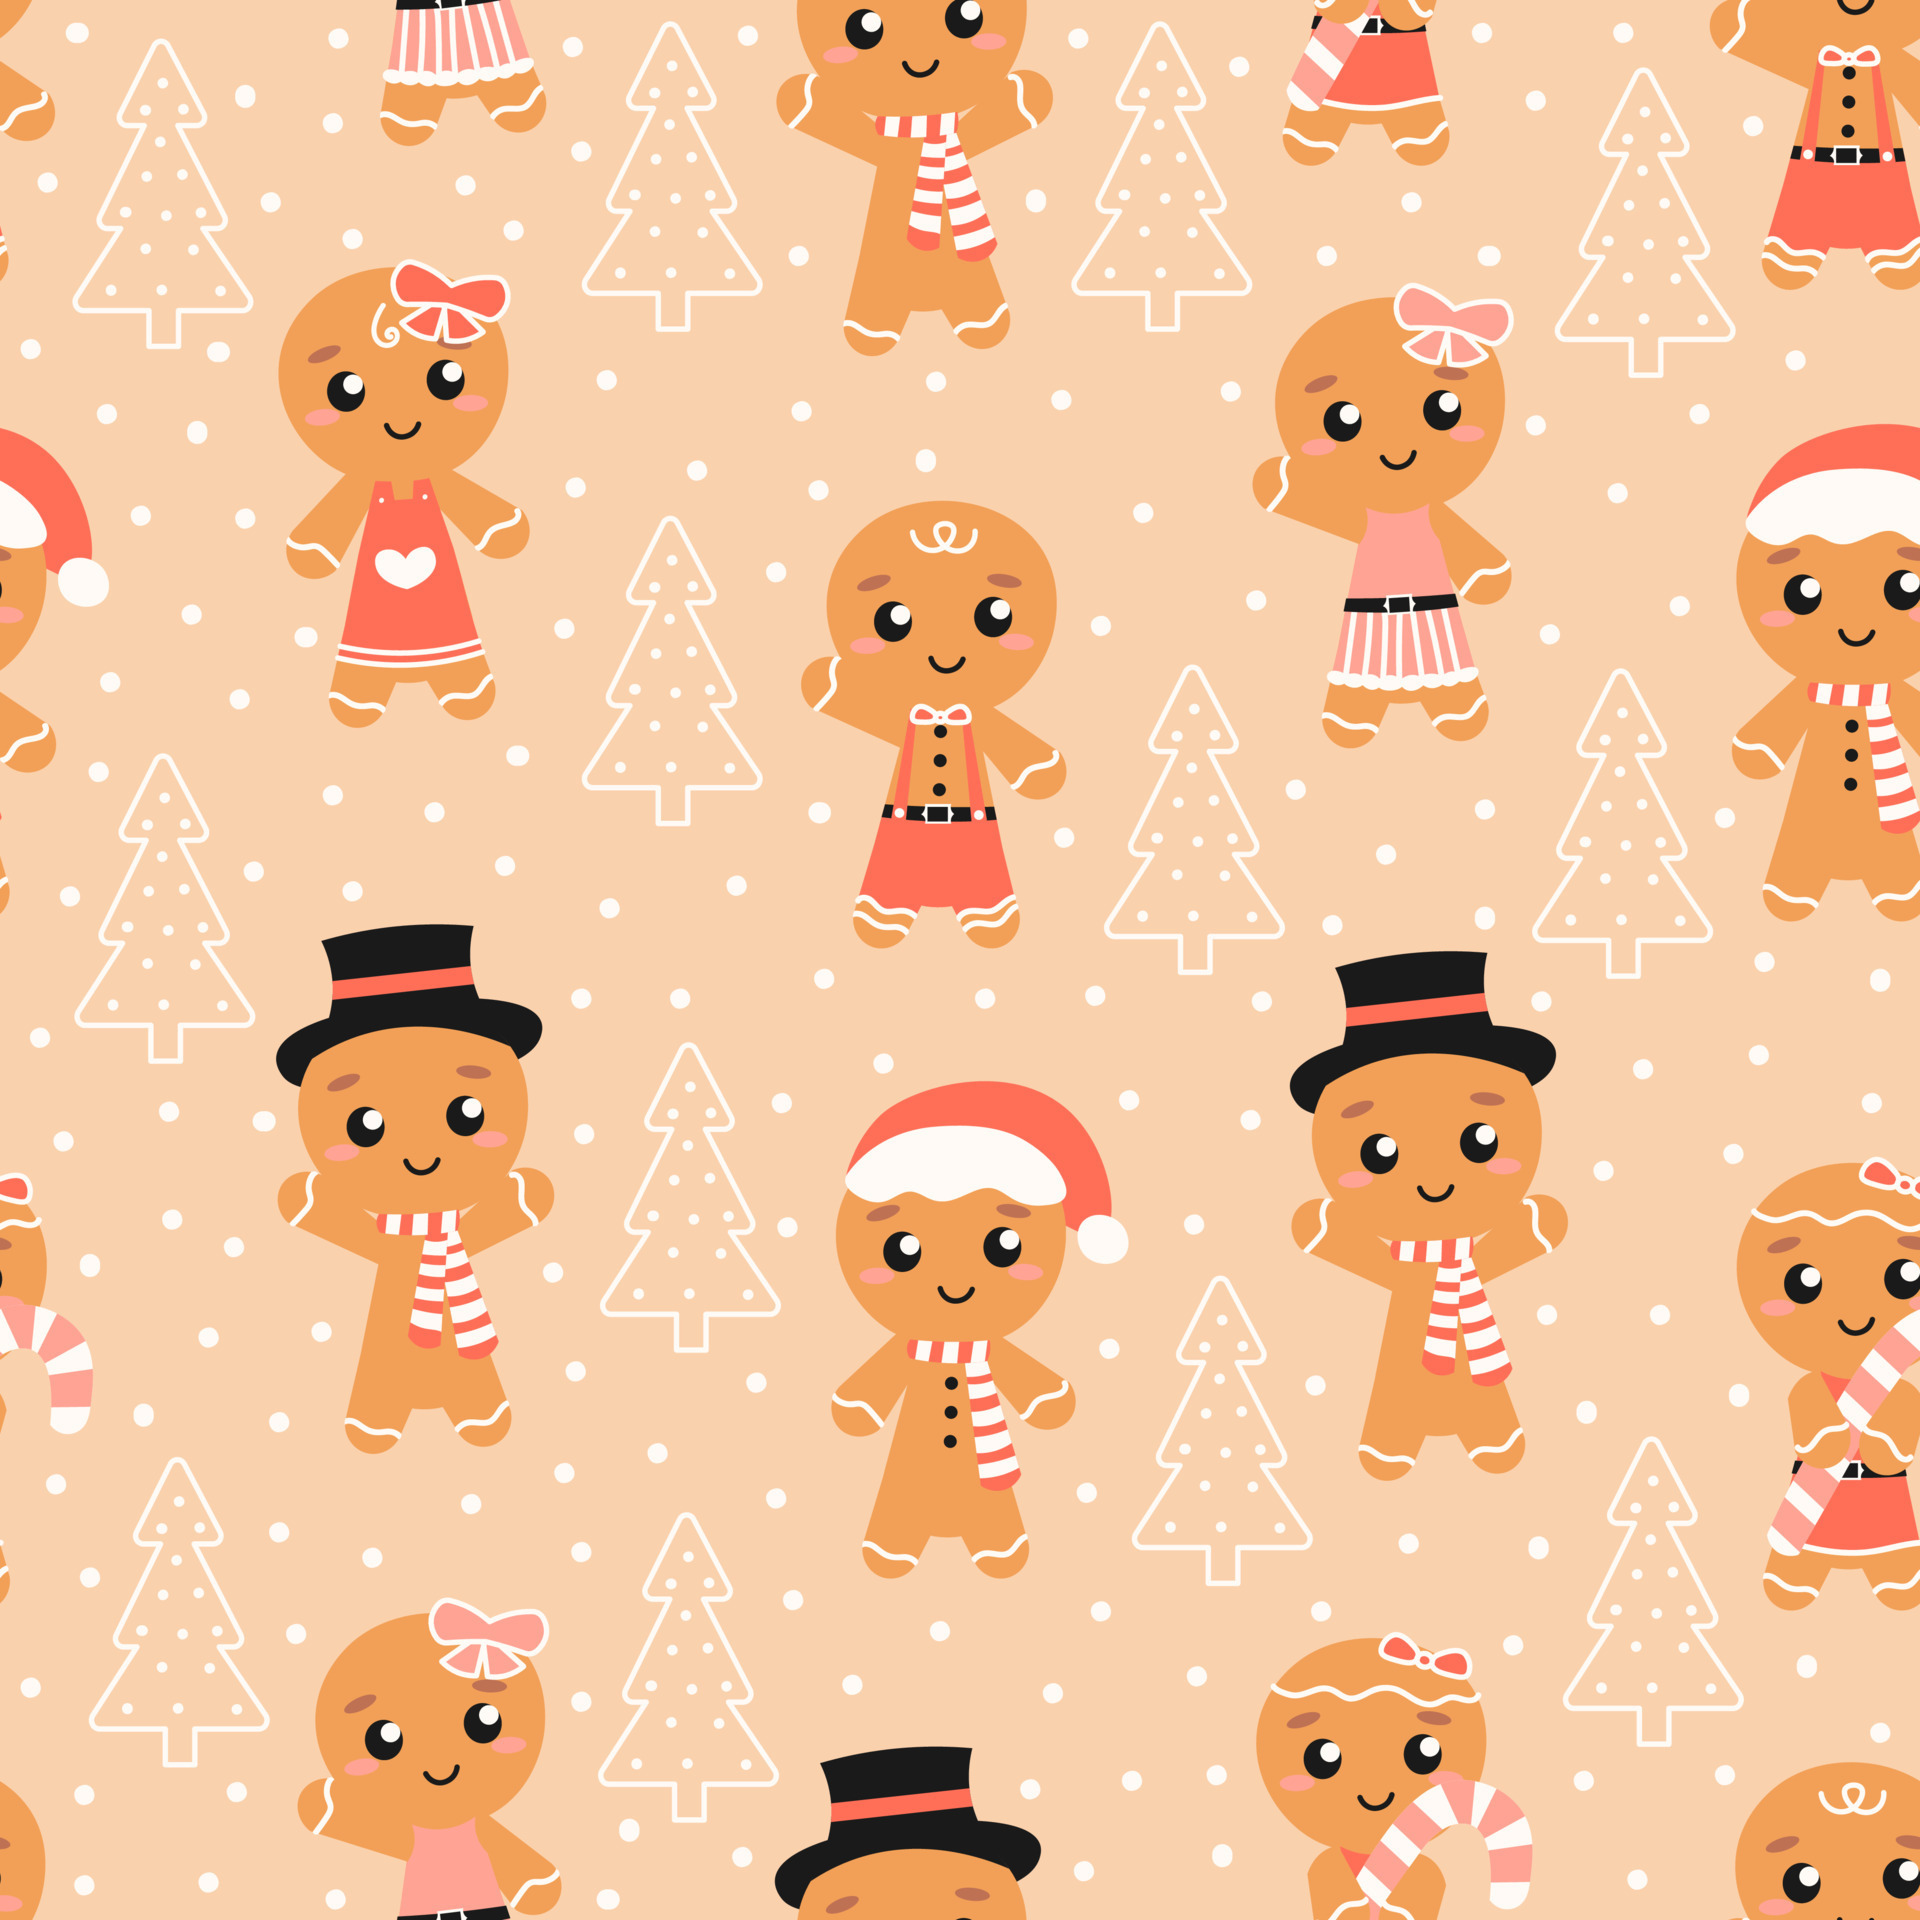 Cute gingerbread cookies with Christmas eve seamless pattern on light background for textile, print or wrapping paper, winter holidays ornament